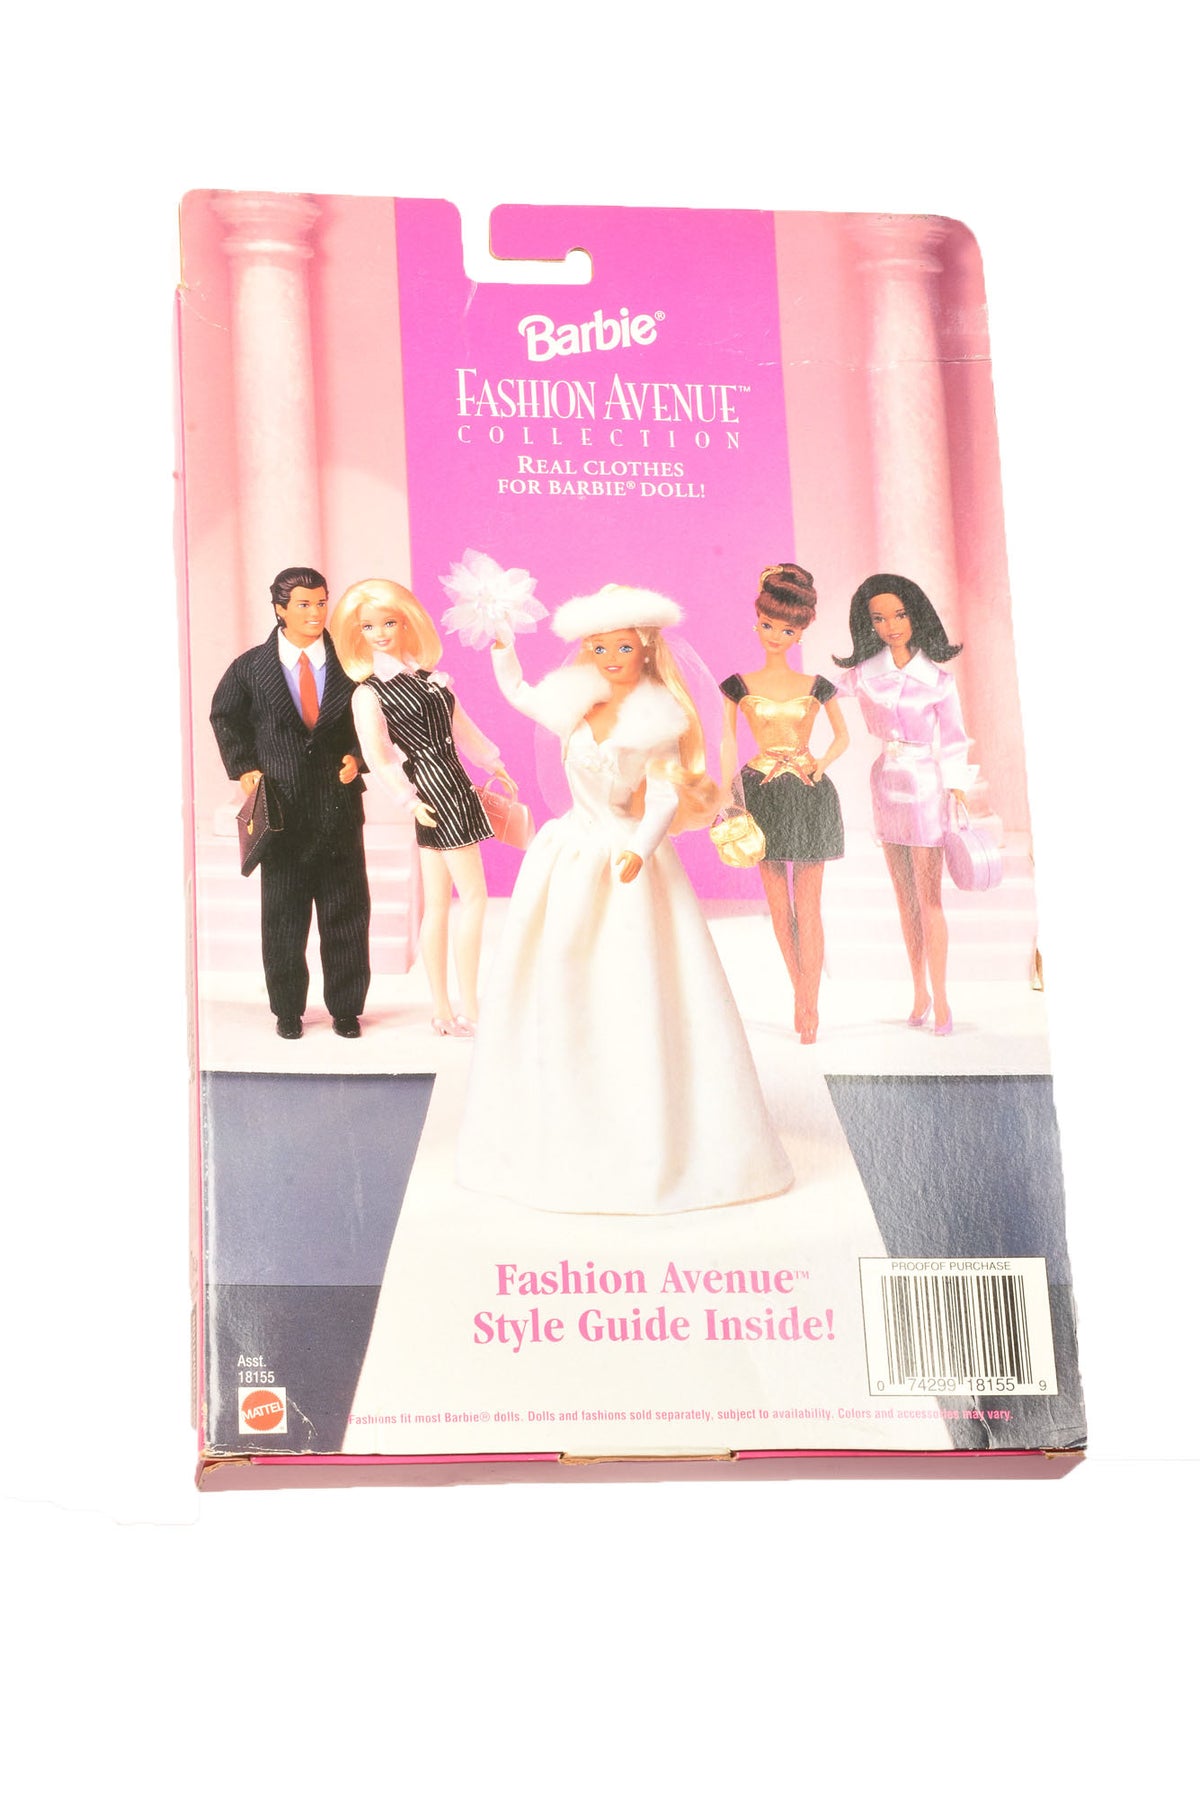 Mattel Toy Doll Clothes